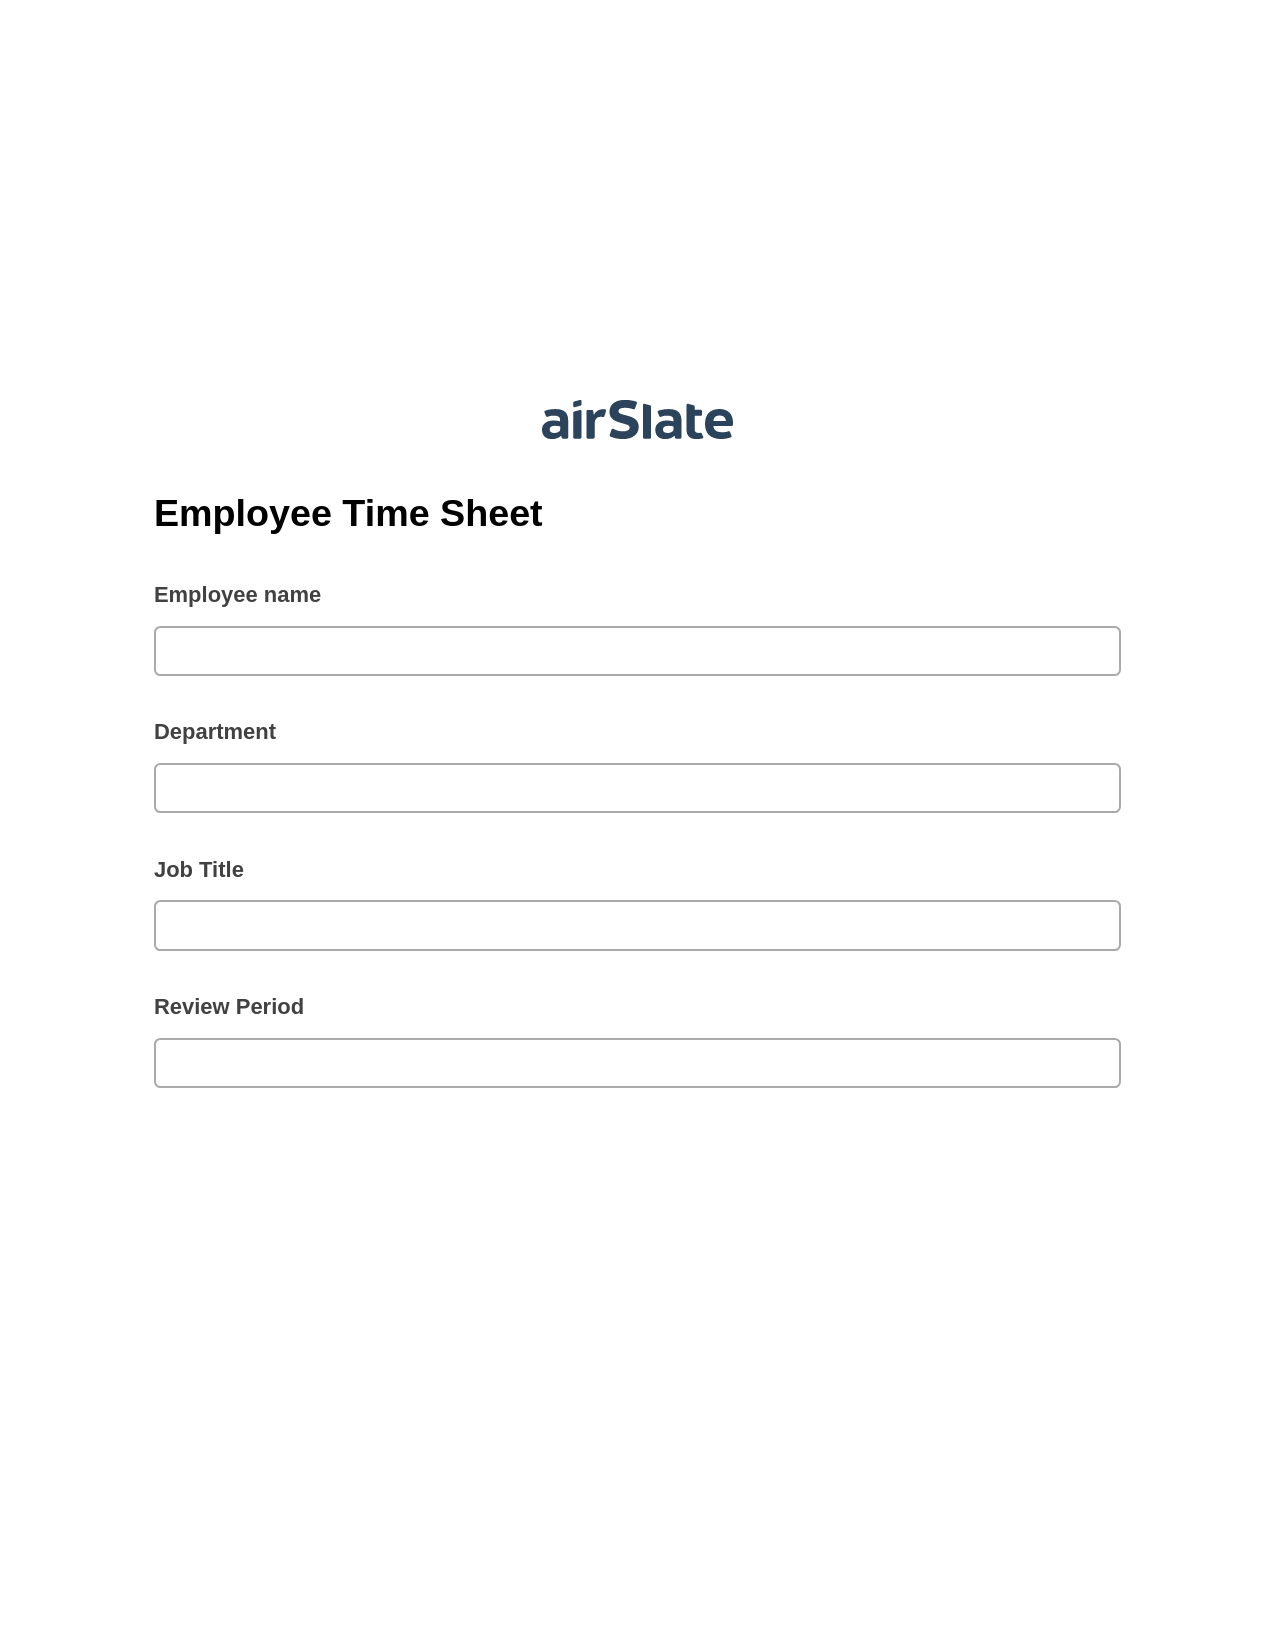 Multirole Employee Time Sheet Pre-fill from Salesforce Records Bot, Create slate addon, Export to Excel 365 Bot